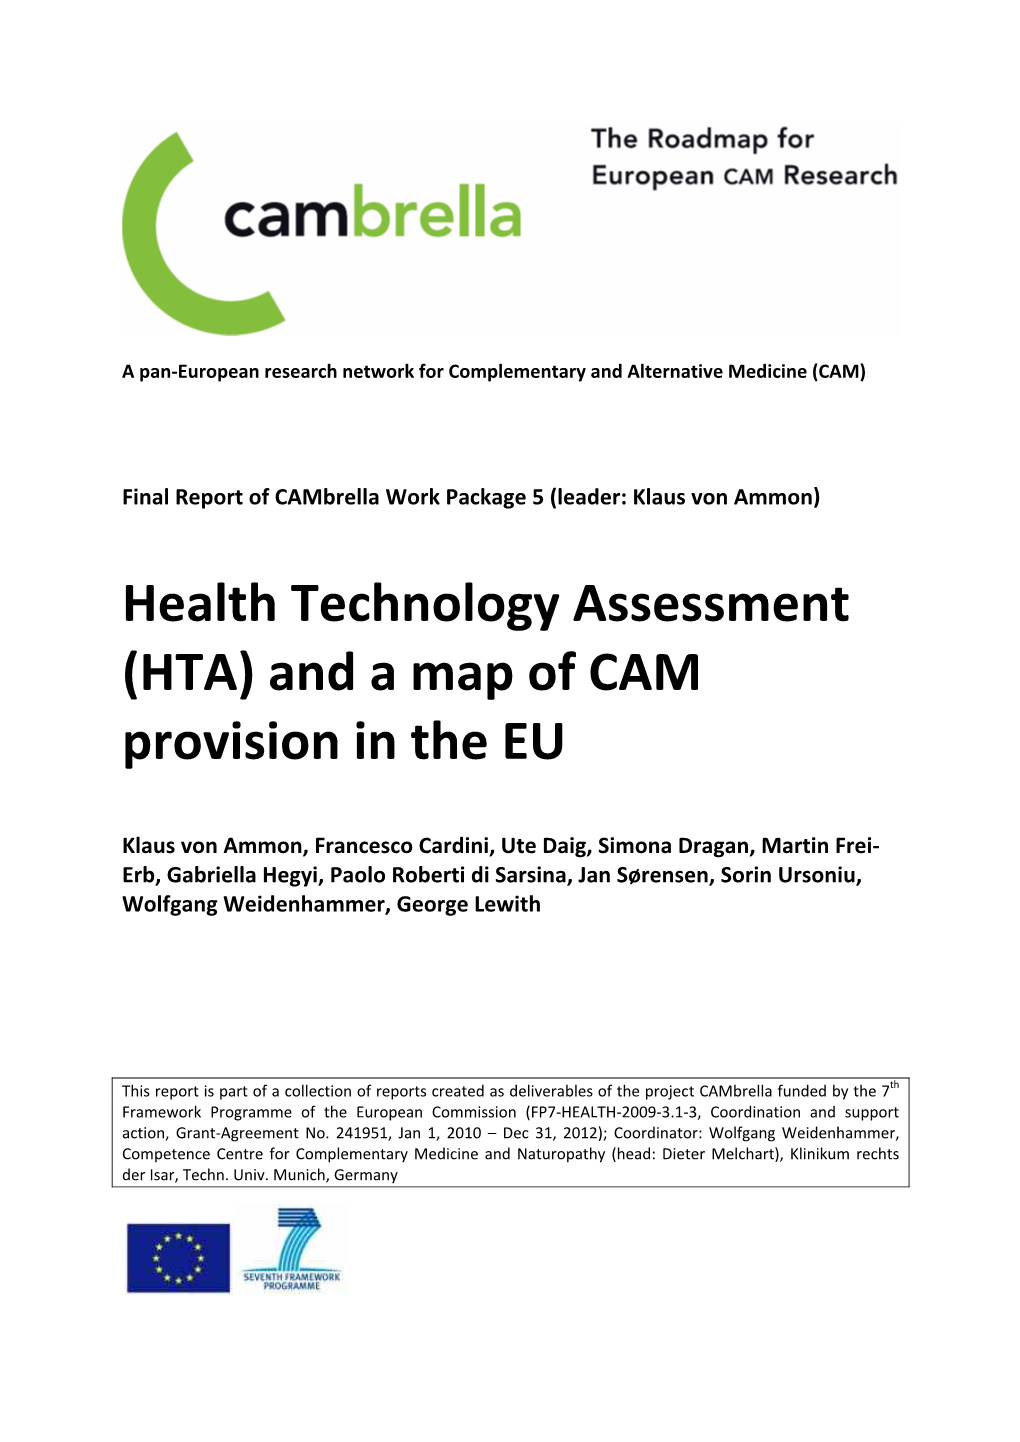 Health Technology Assessment (HTA) and a Map of CAM Provision